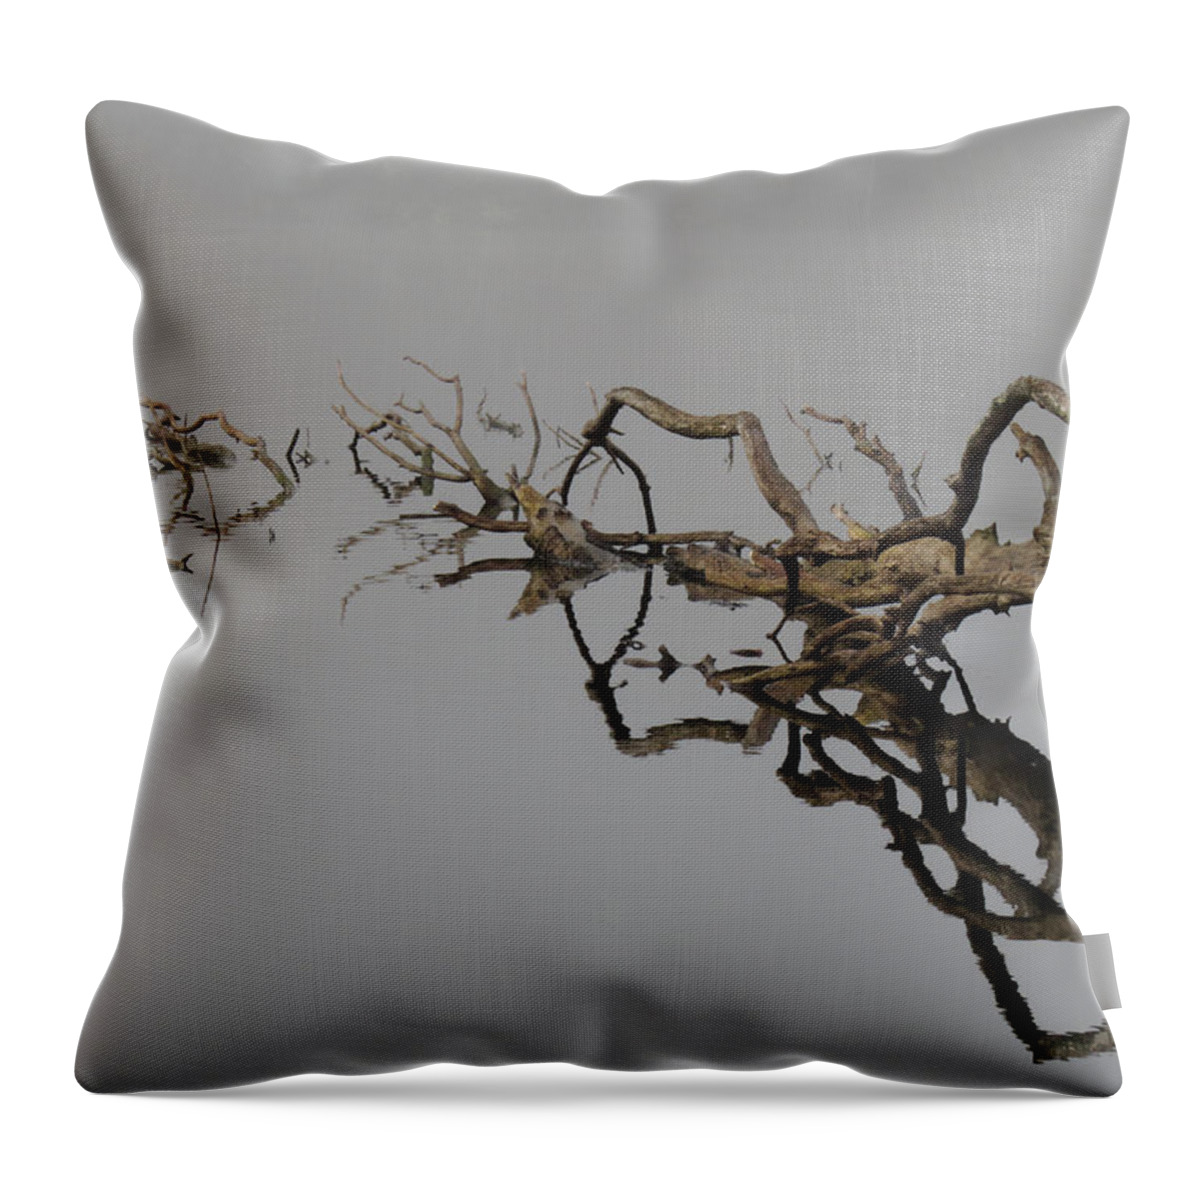 Driftwood Pond Reflections Throw Pillow featuring the digital art Nature's Work In Progress by I'ina Van Lawick